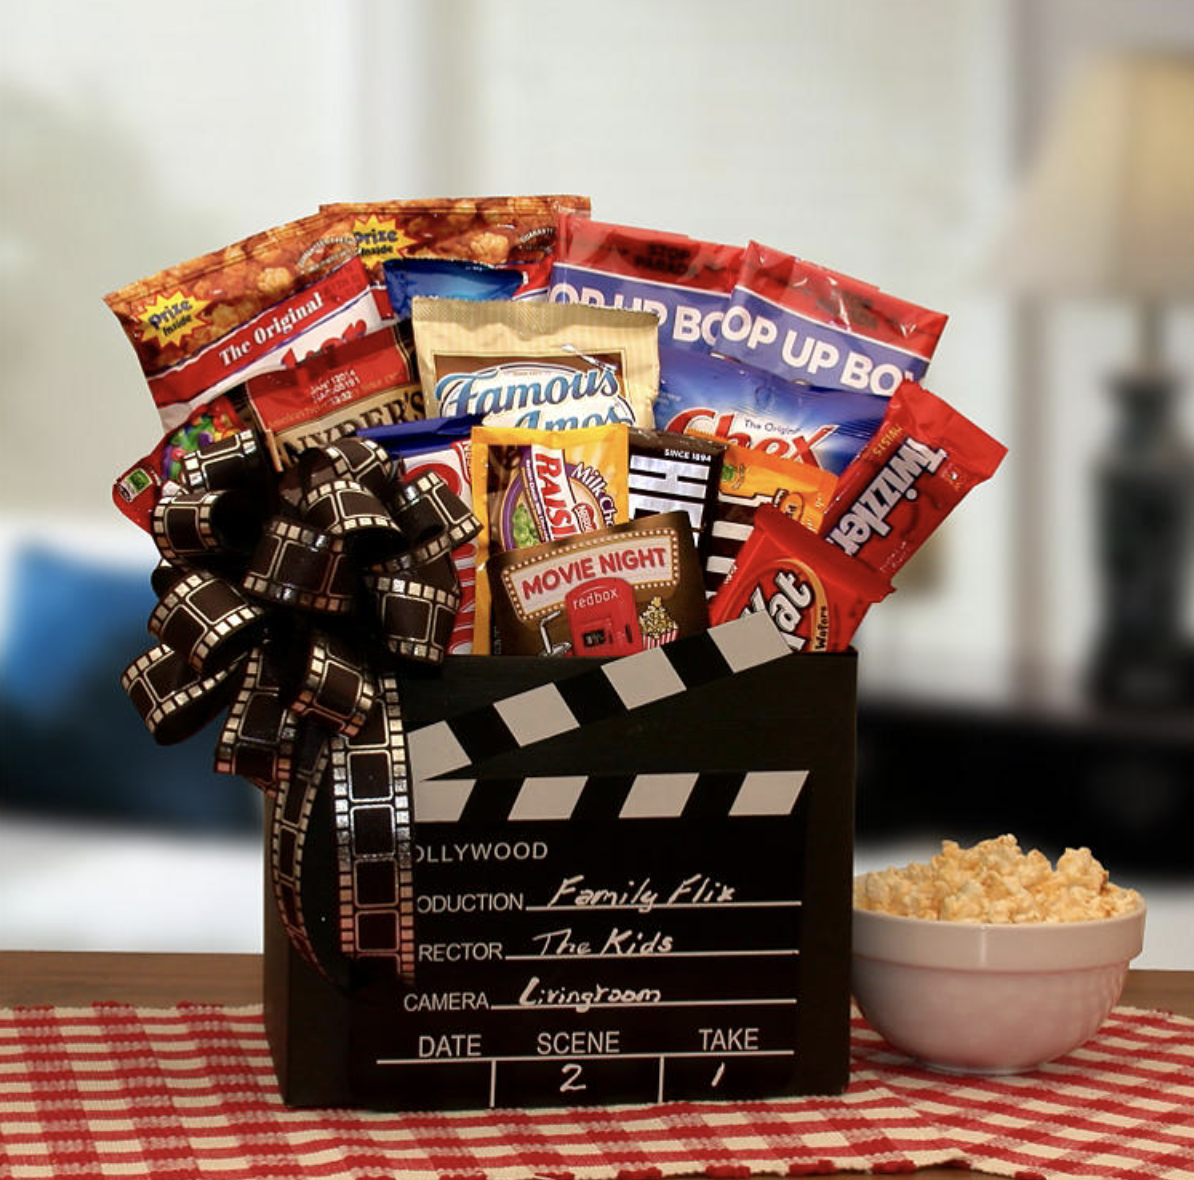 Movie snacks and redbox gift card in movie clapboard box